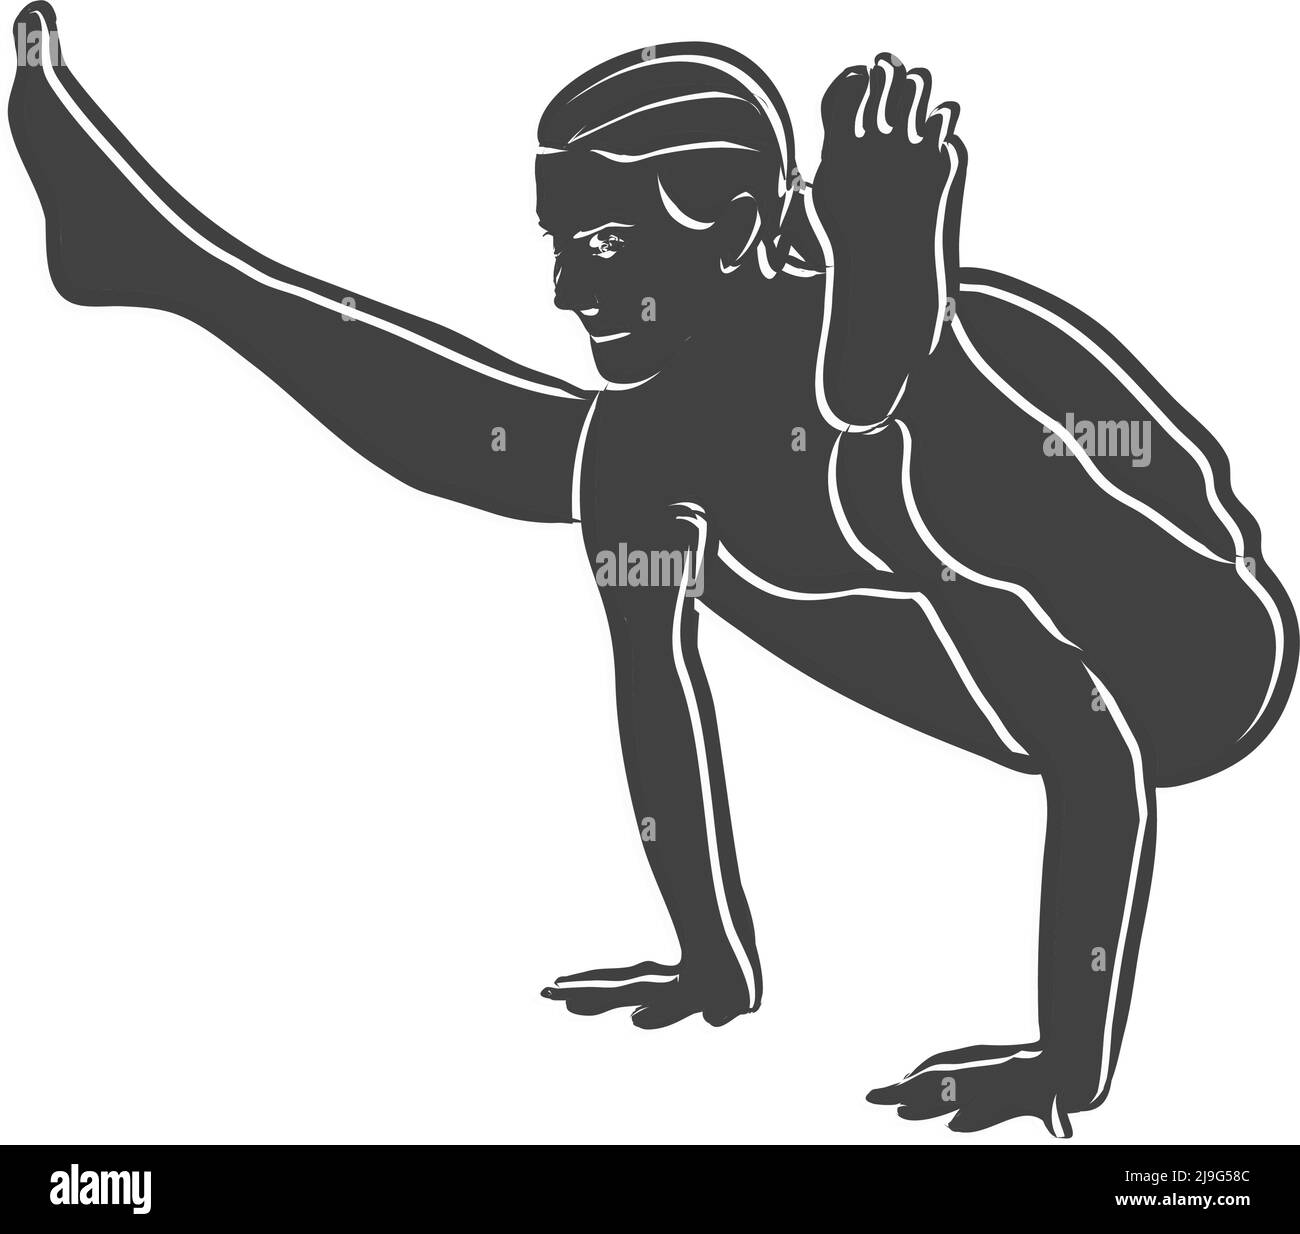 Black Tittibhasana Yoga Pose Outline Icon. Vector illustration made by hand. White lines isolated on black shape. Stock Vector